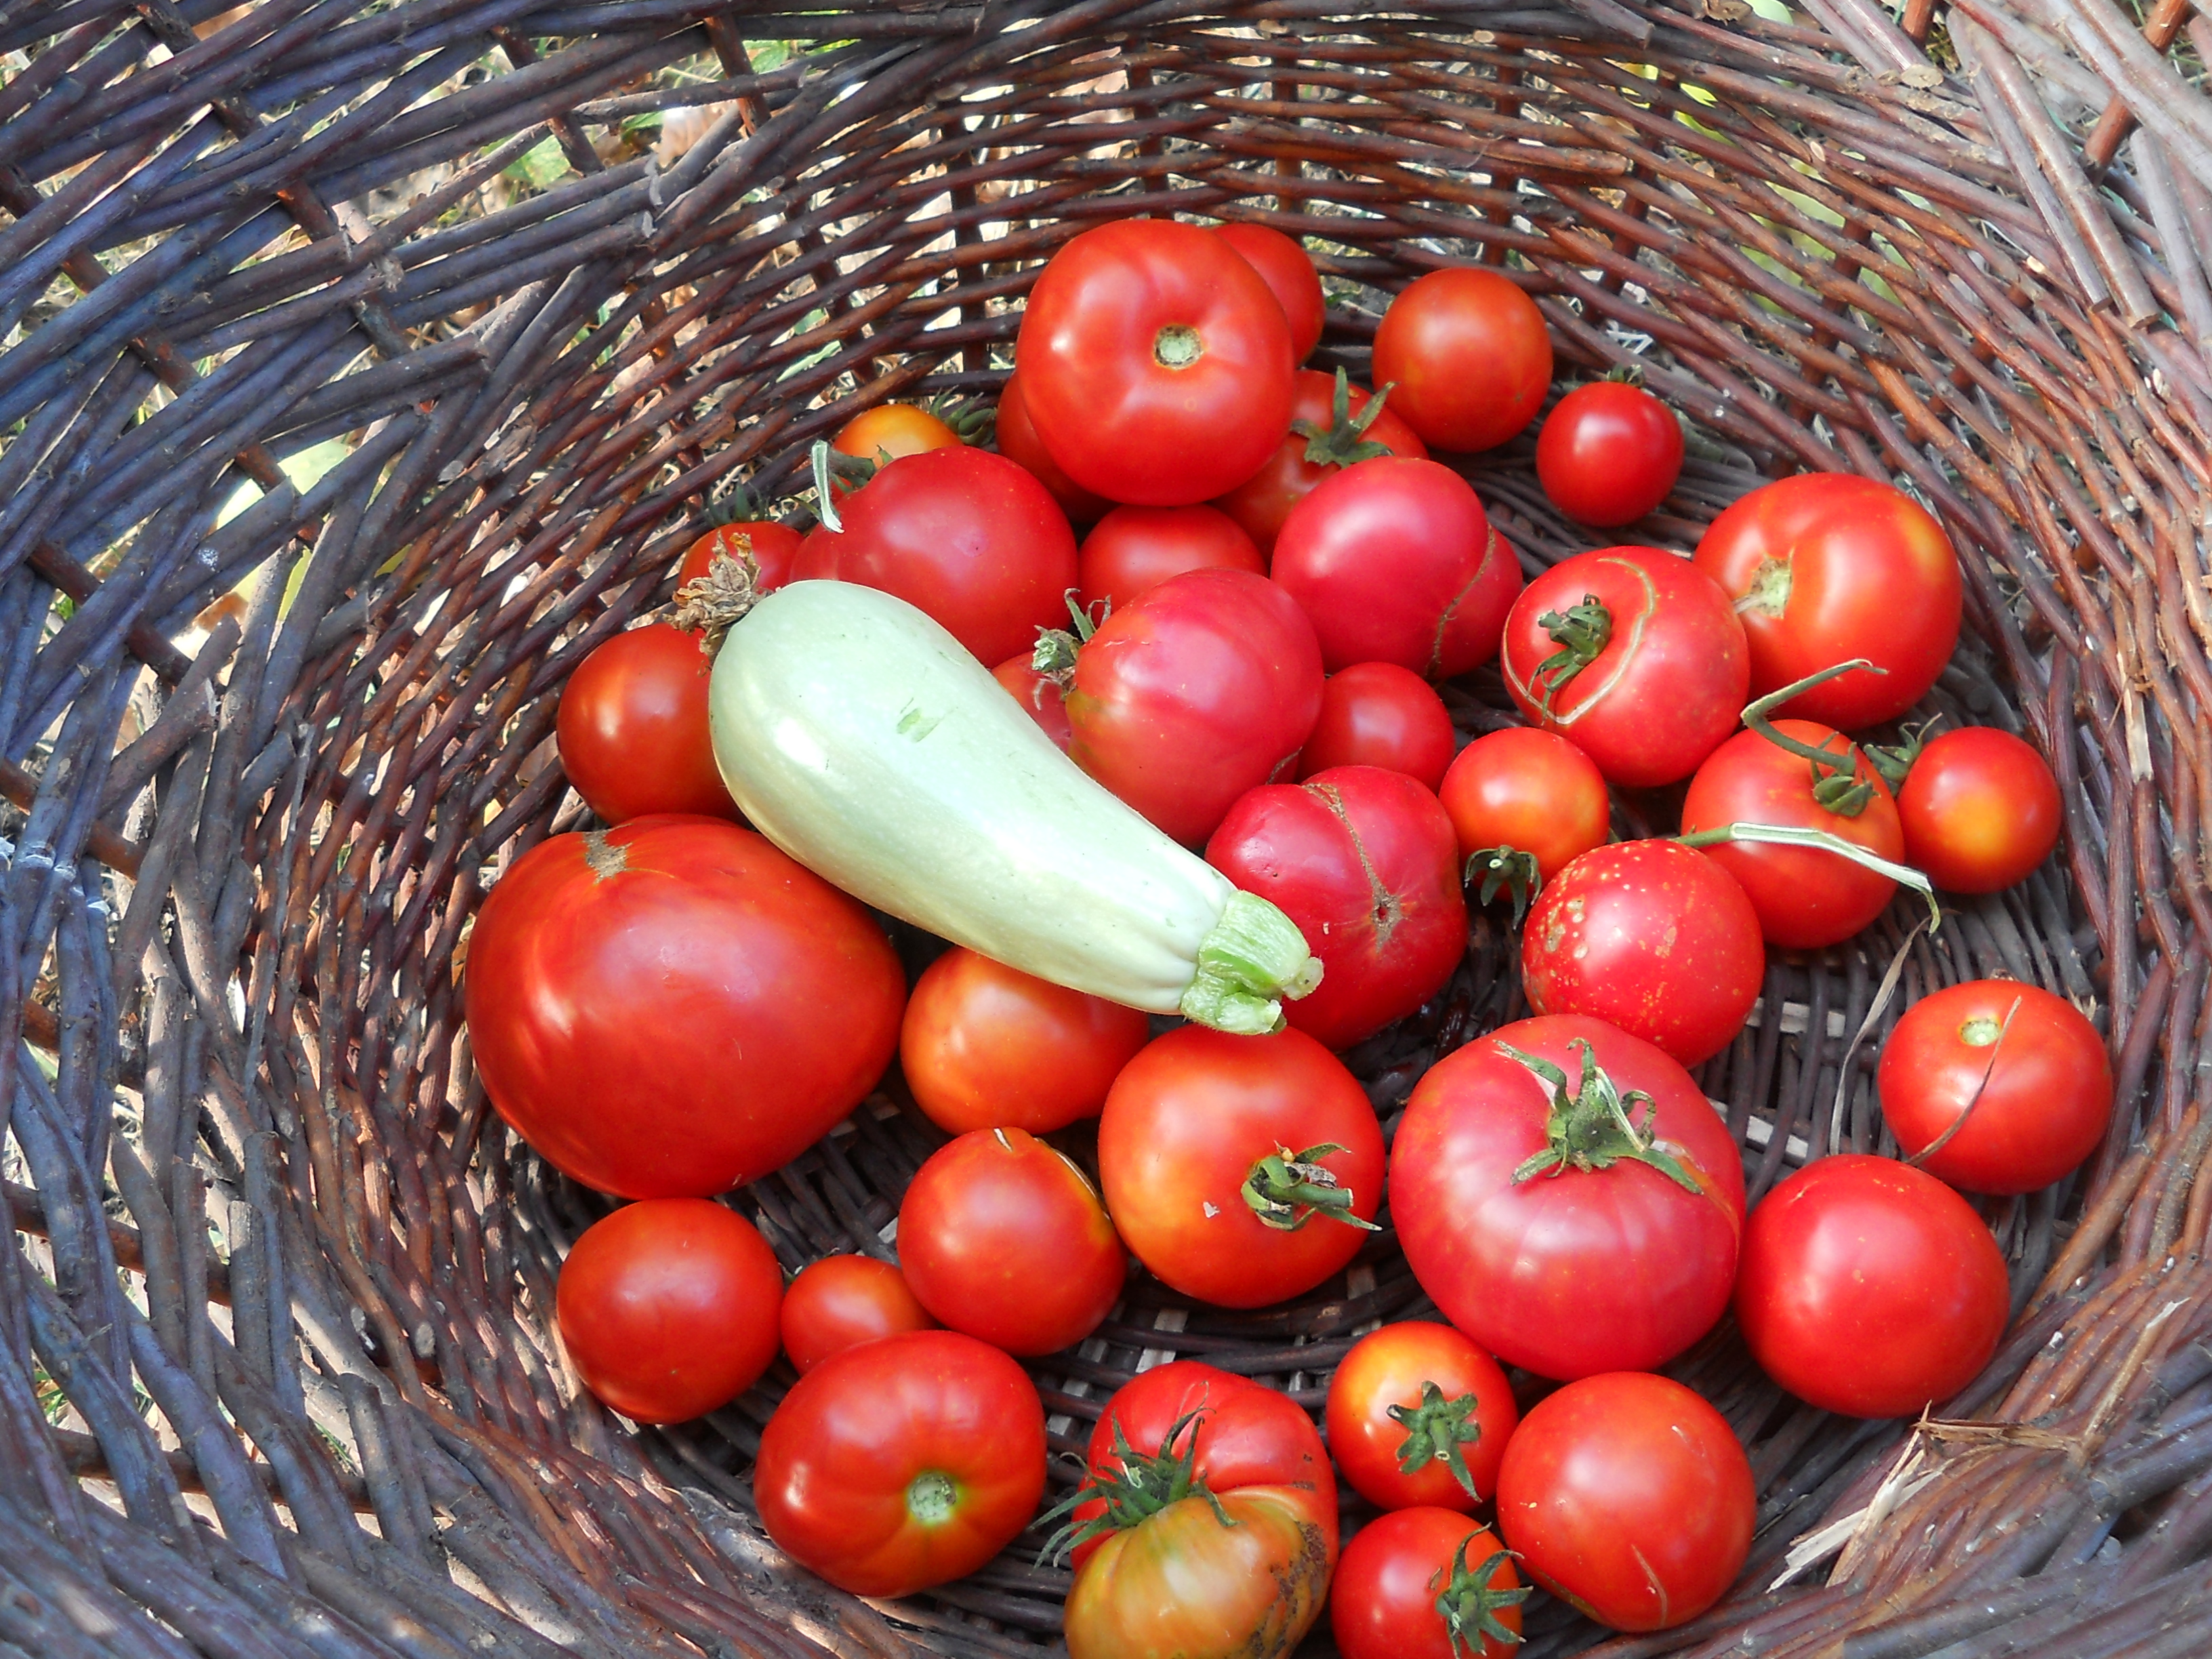 Tomatoes in basket